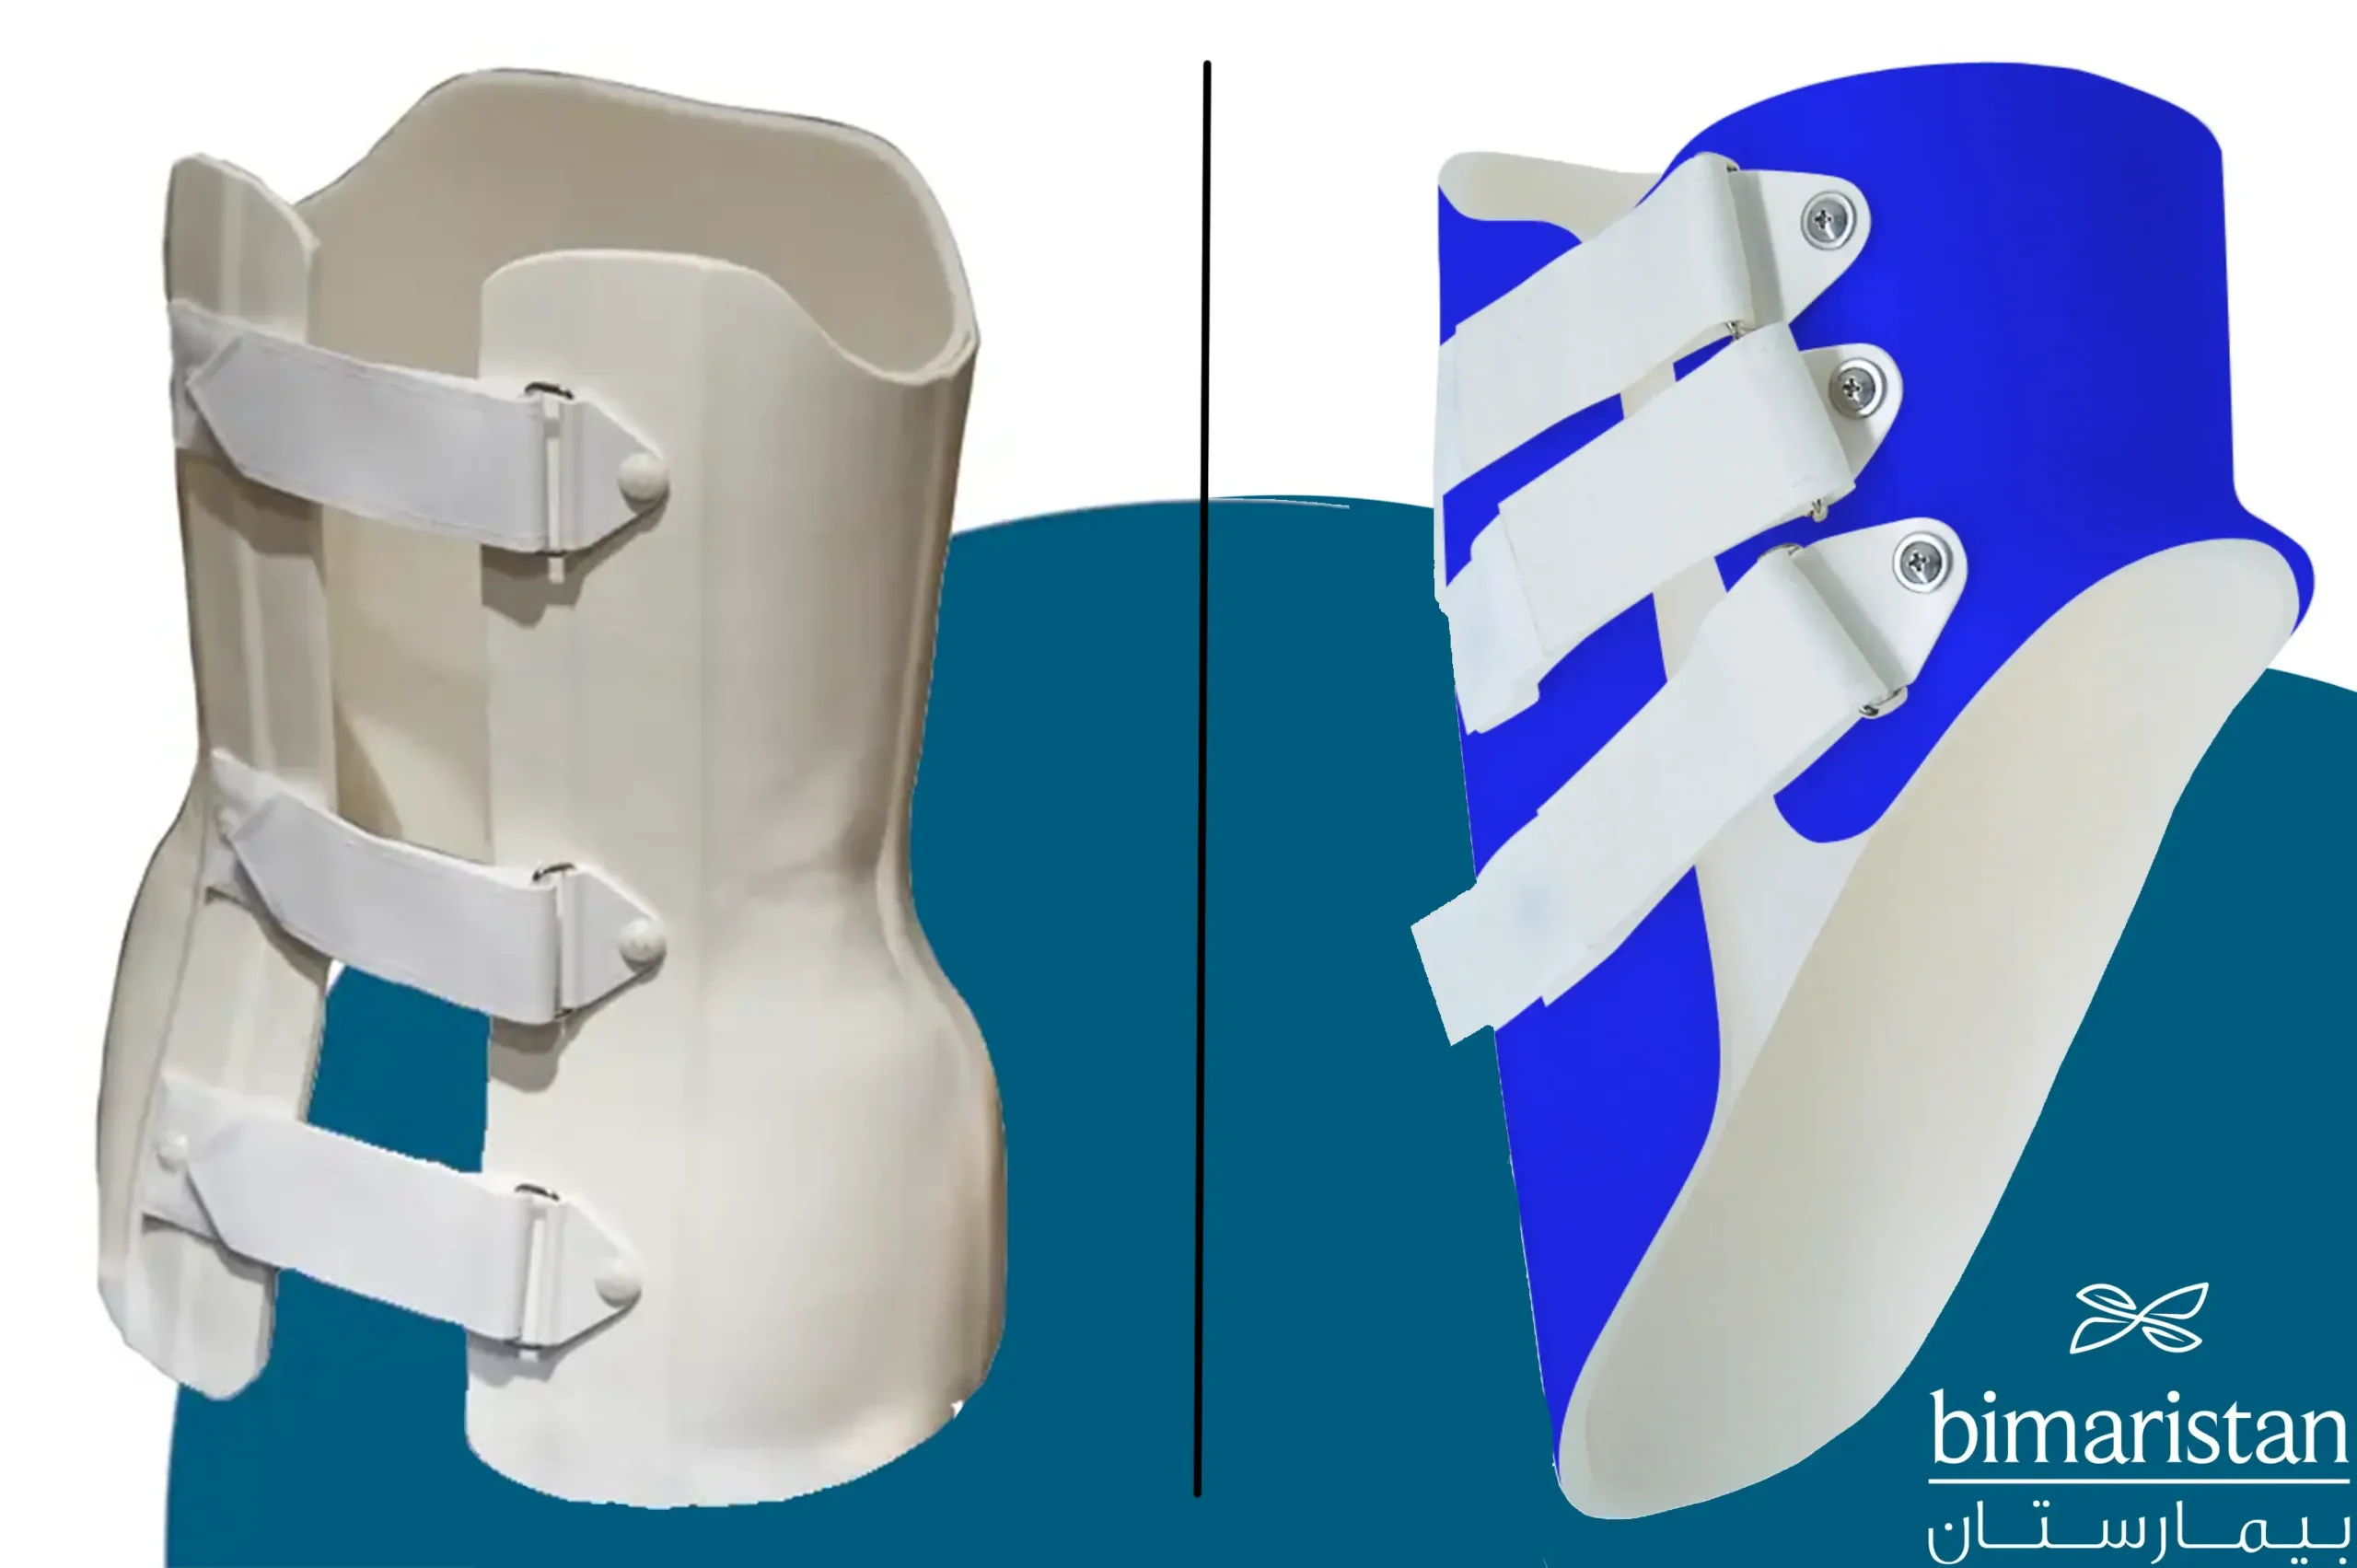 Image showing the braces used in the treatment of scoliosis, the Providence brace (right) and the Boston brace (left).